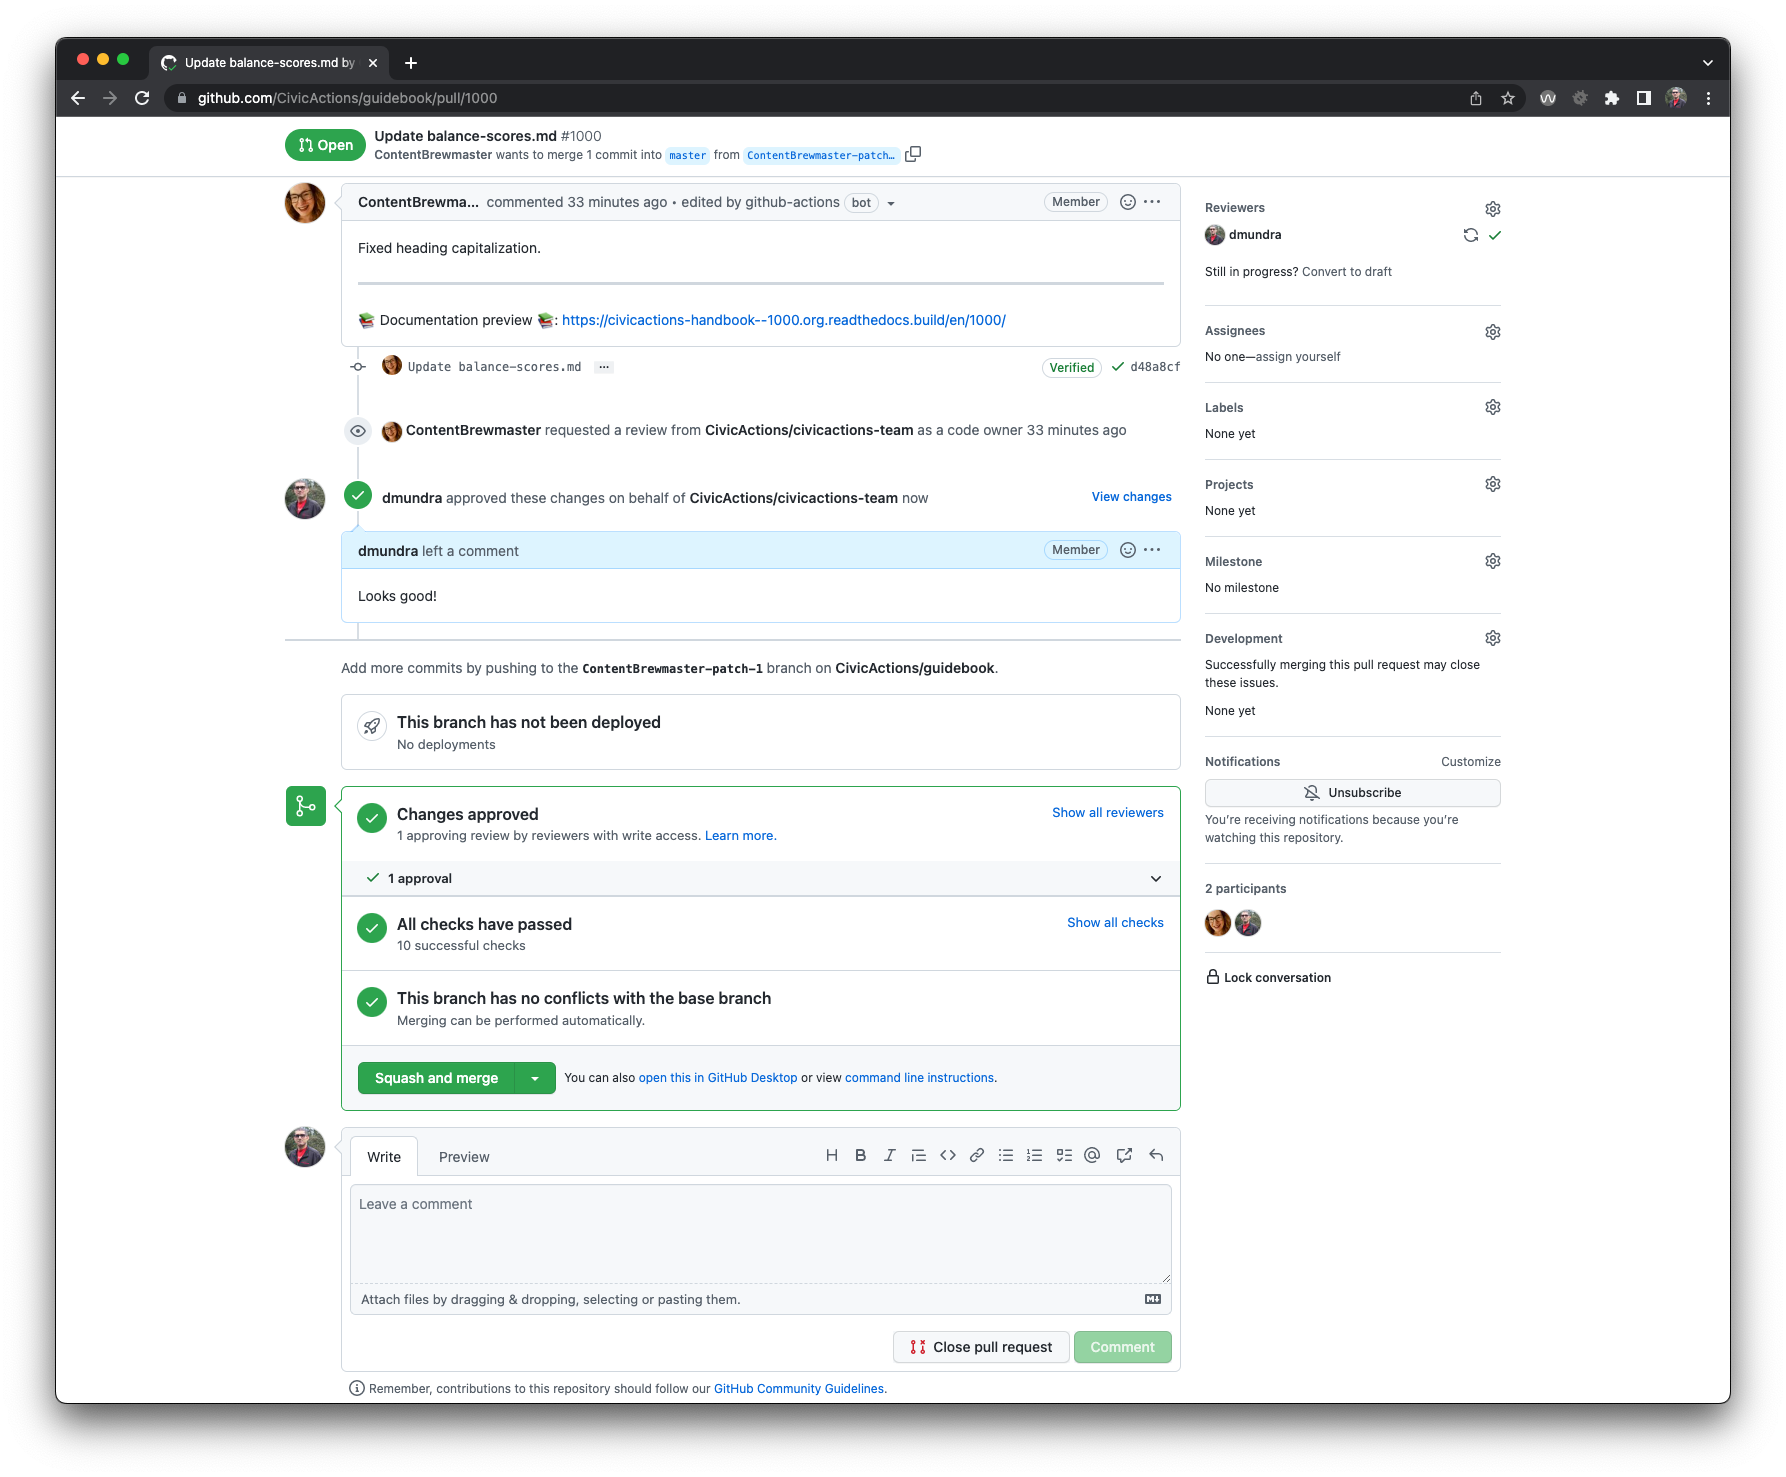 Screenshot of GitHub indicating that changes have been approved, all checks have passed, and the branch has no conflicts with the base branch.